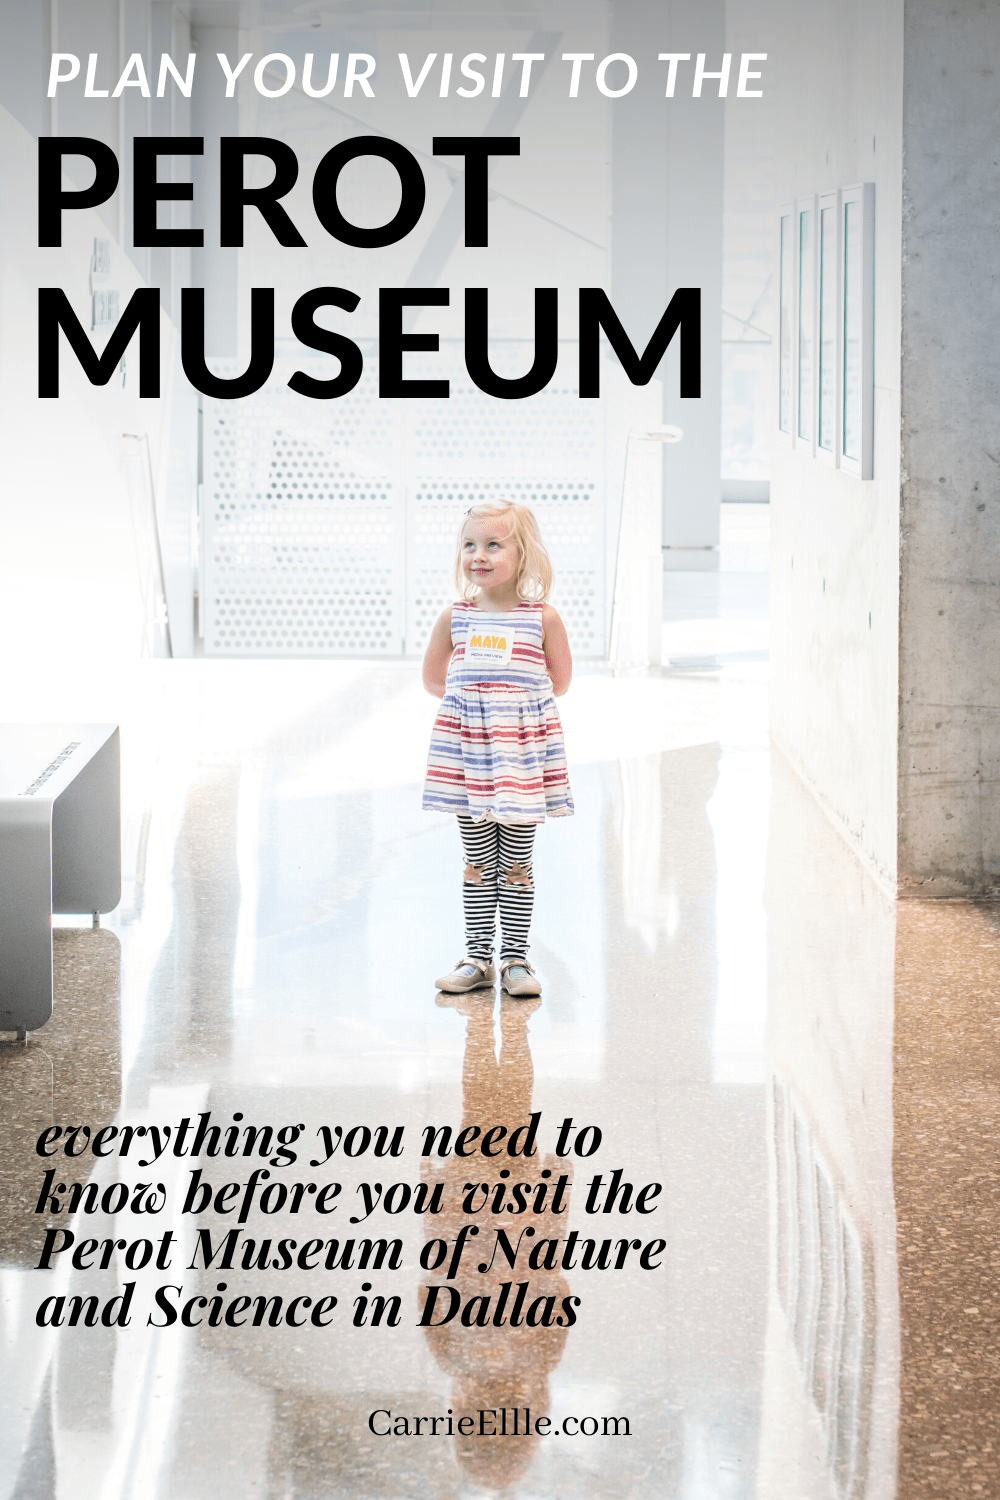 Plan Your Visit to the Perot Museum